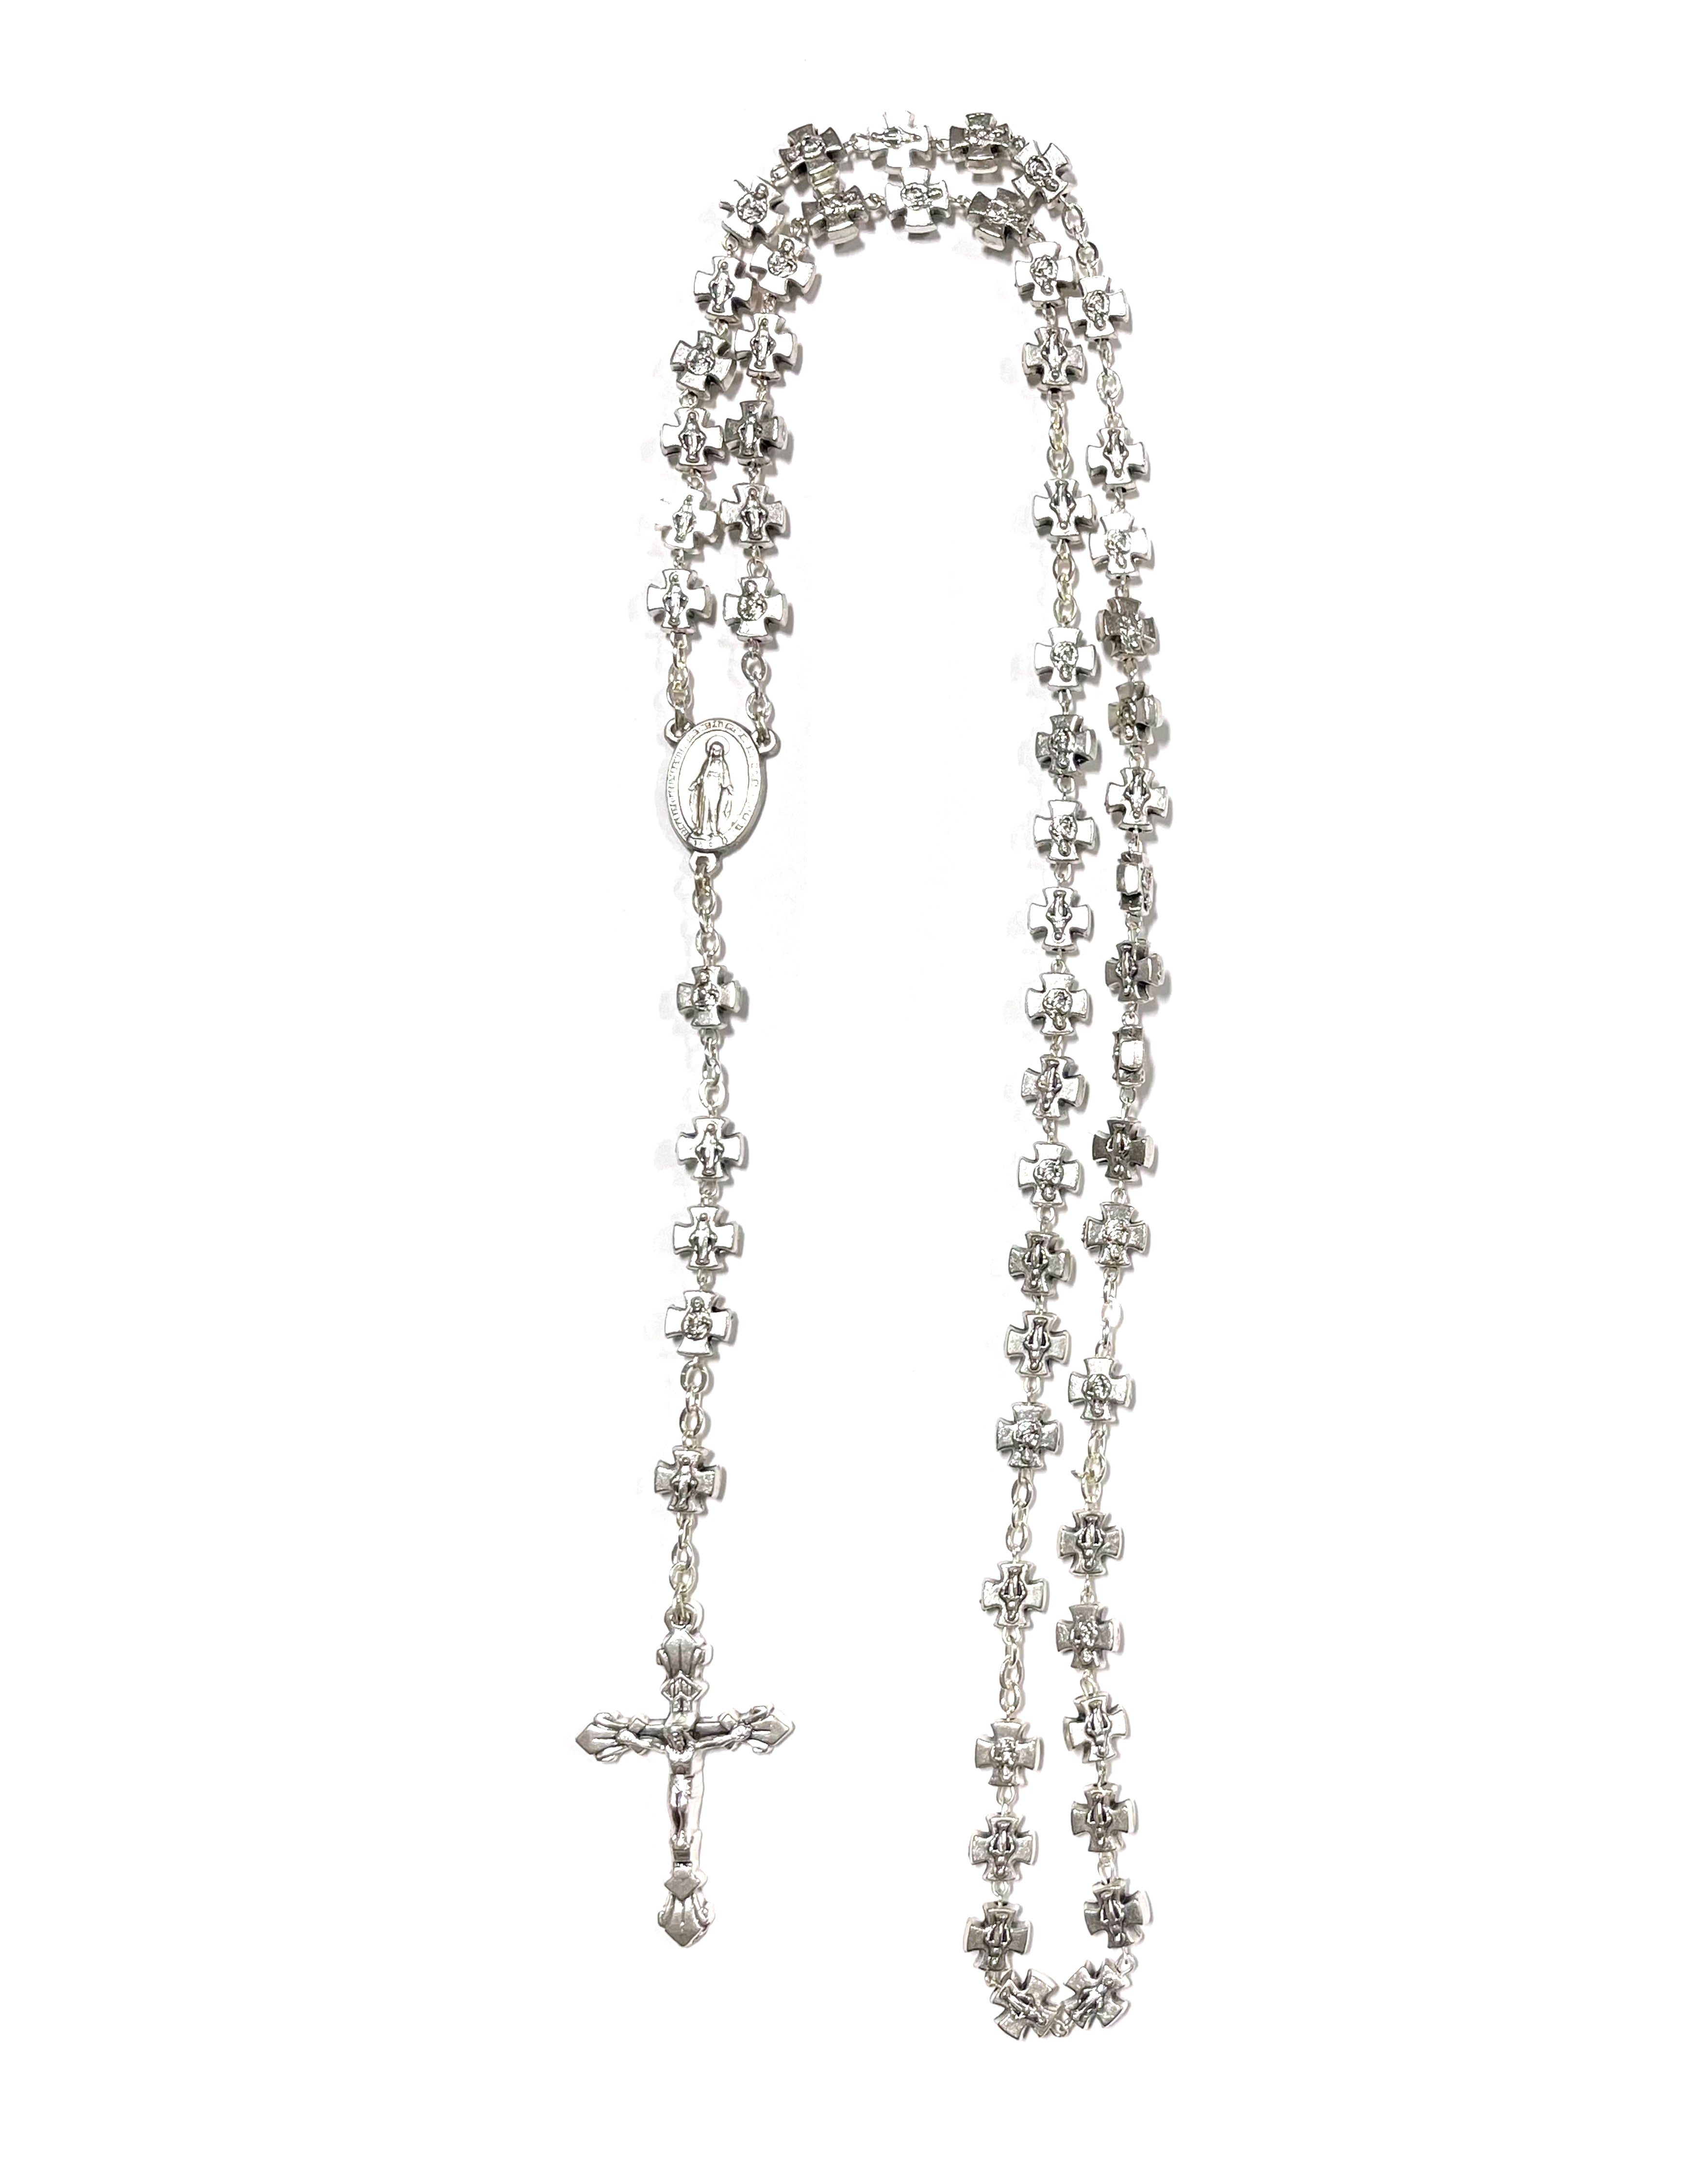 Rosary of the Miraculous medal with beads in form of crosses